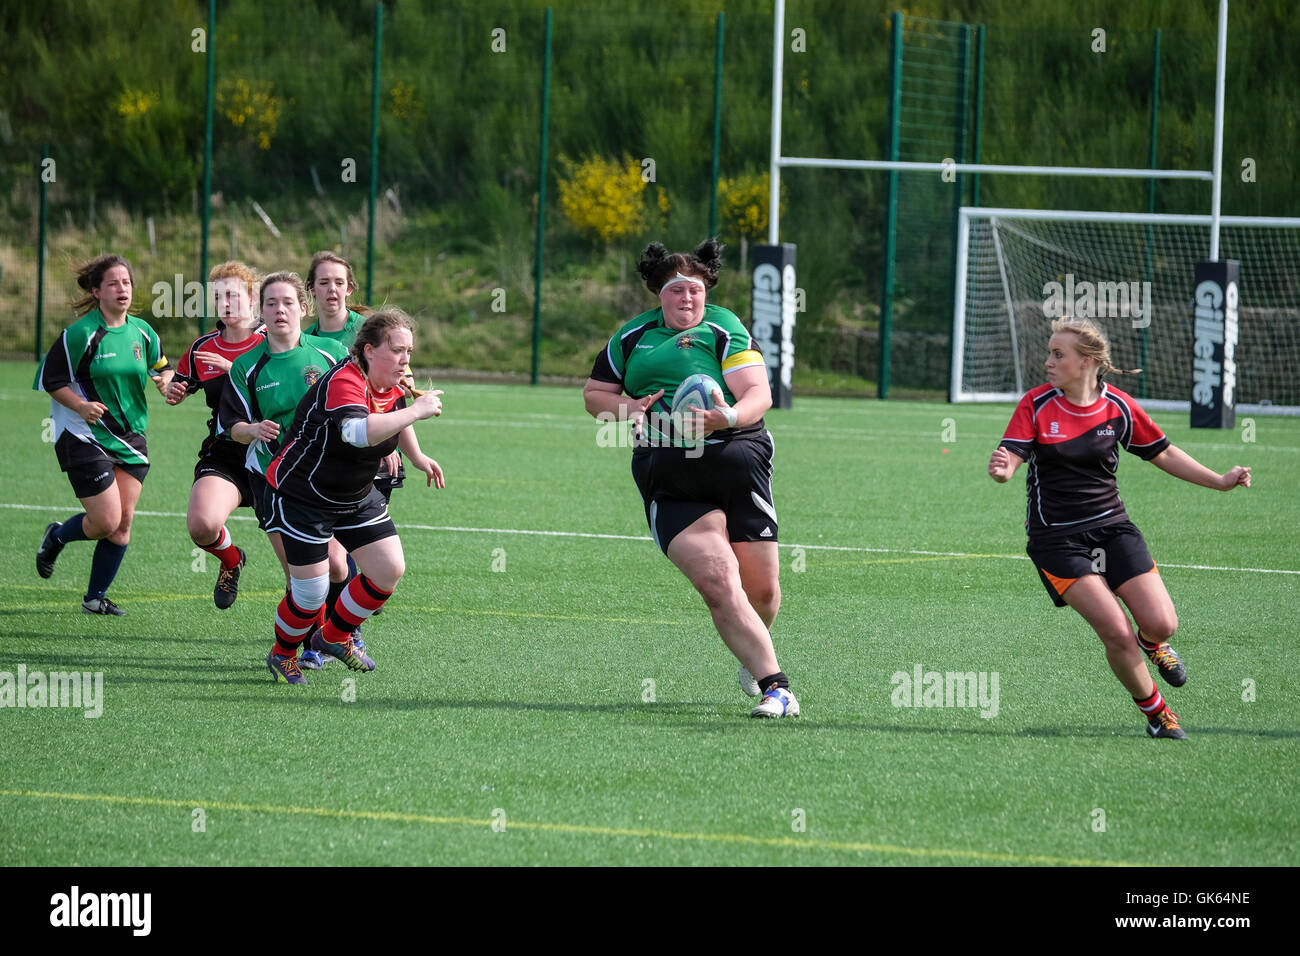 Women's Rugby match Stock Photo